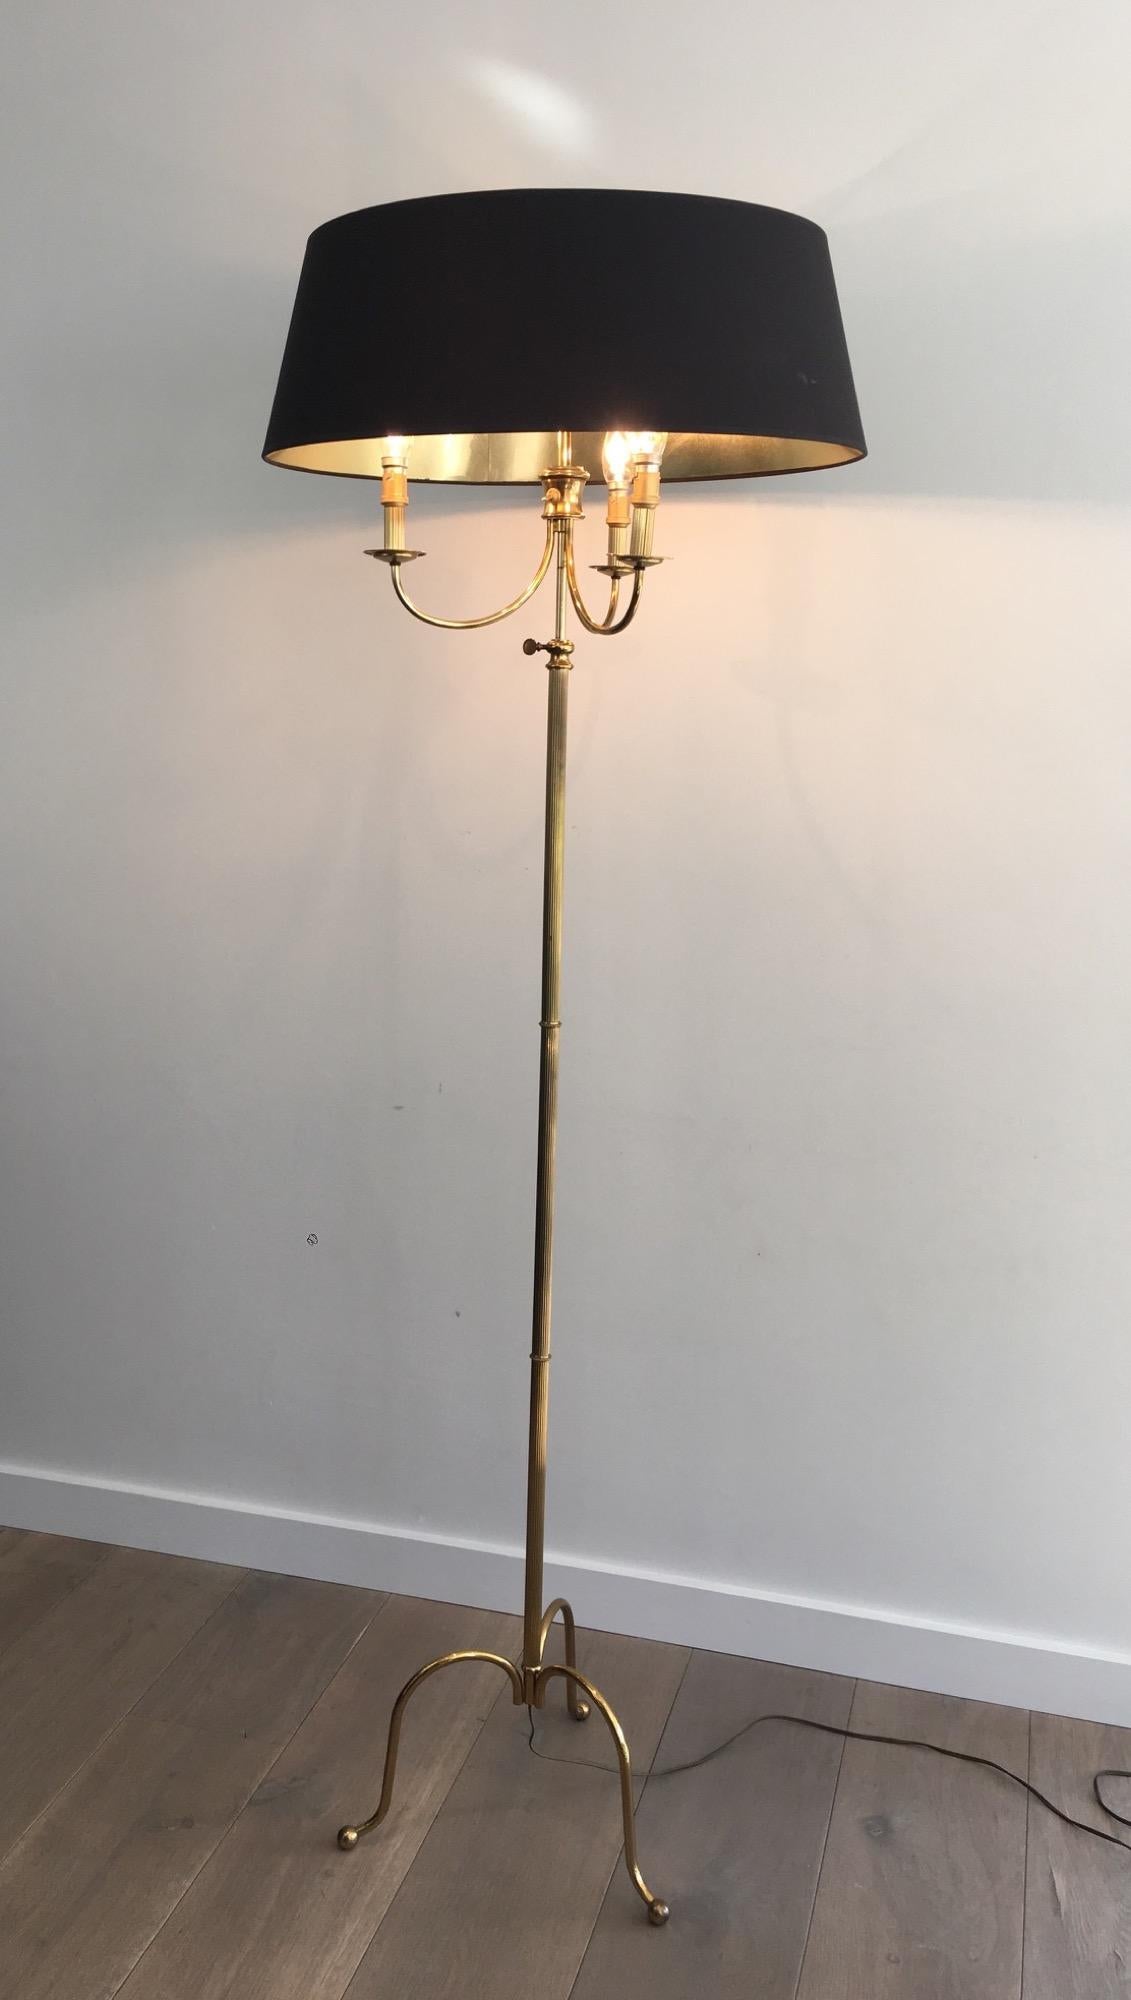 This neoclassical tripode floor lamp is made of brass with a black shintz shade gild inside. The high is adjustable. This is a French work in the stye of Maison Jansen. Circa 1940